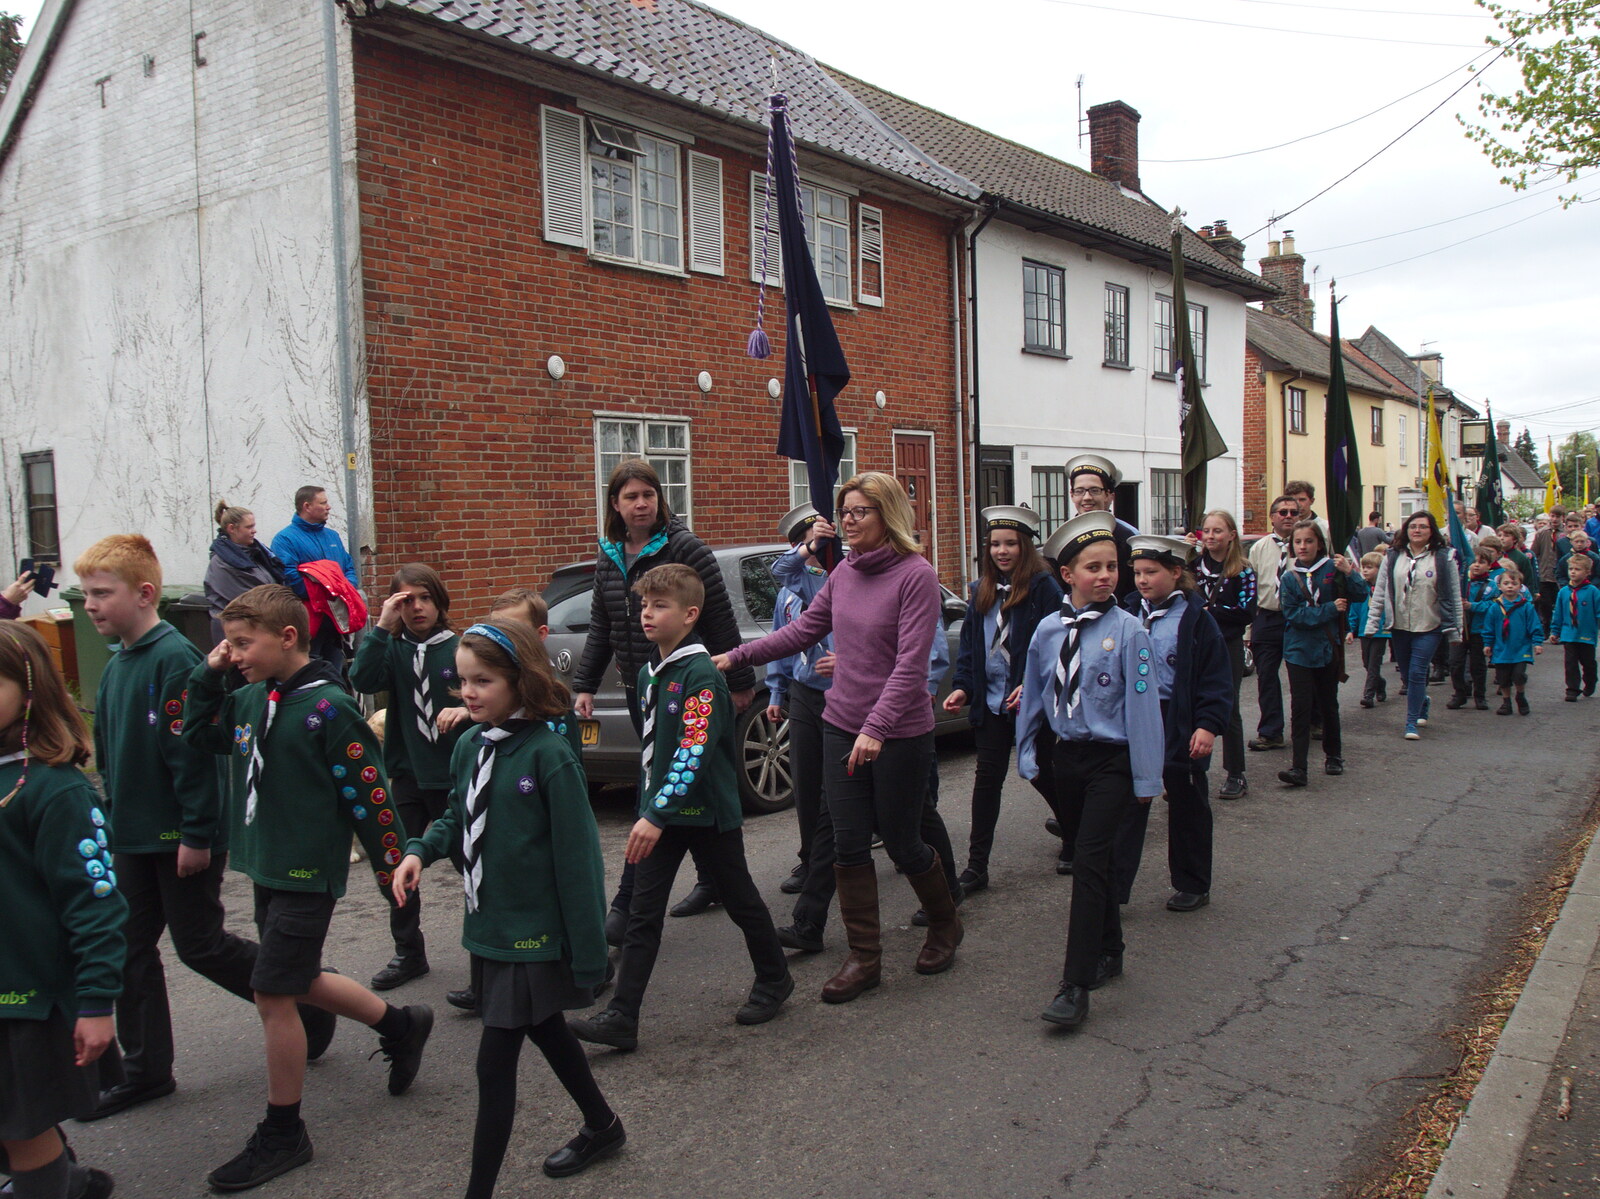 The Sea Scouts march past from A St. George's Day Parade, Dickleburgh, Norfolk - 28th April 2019